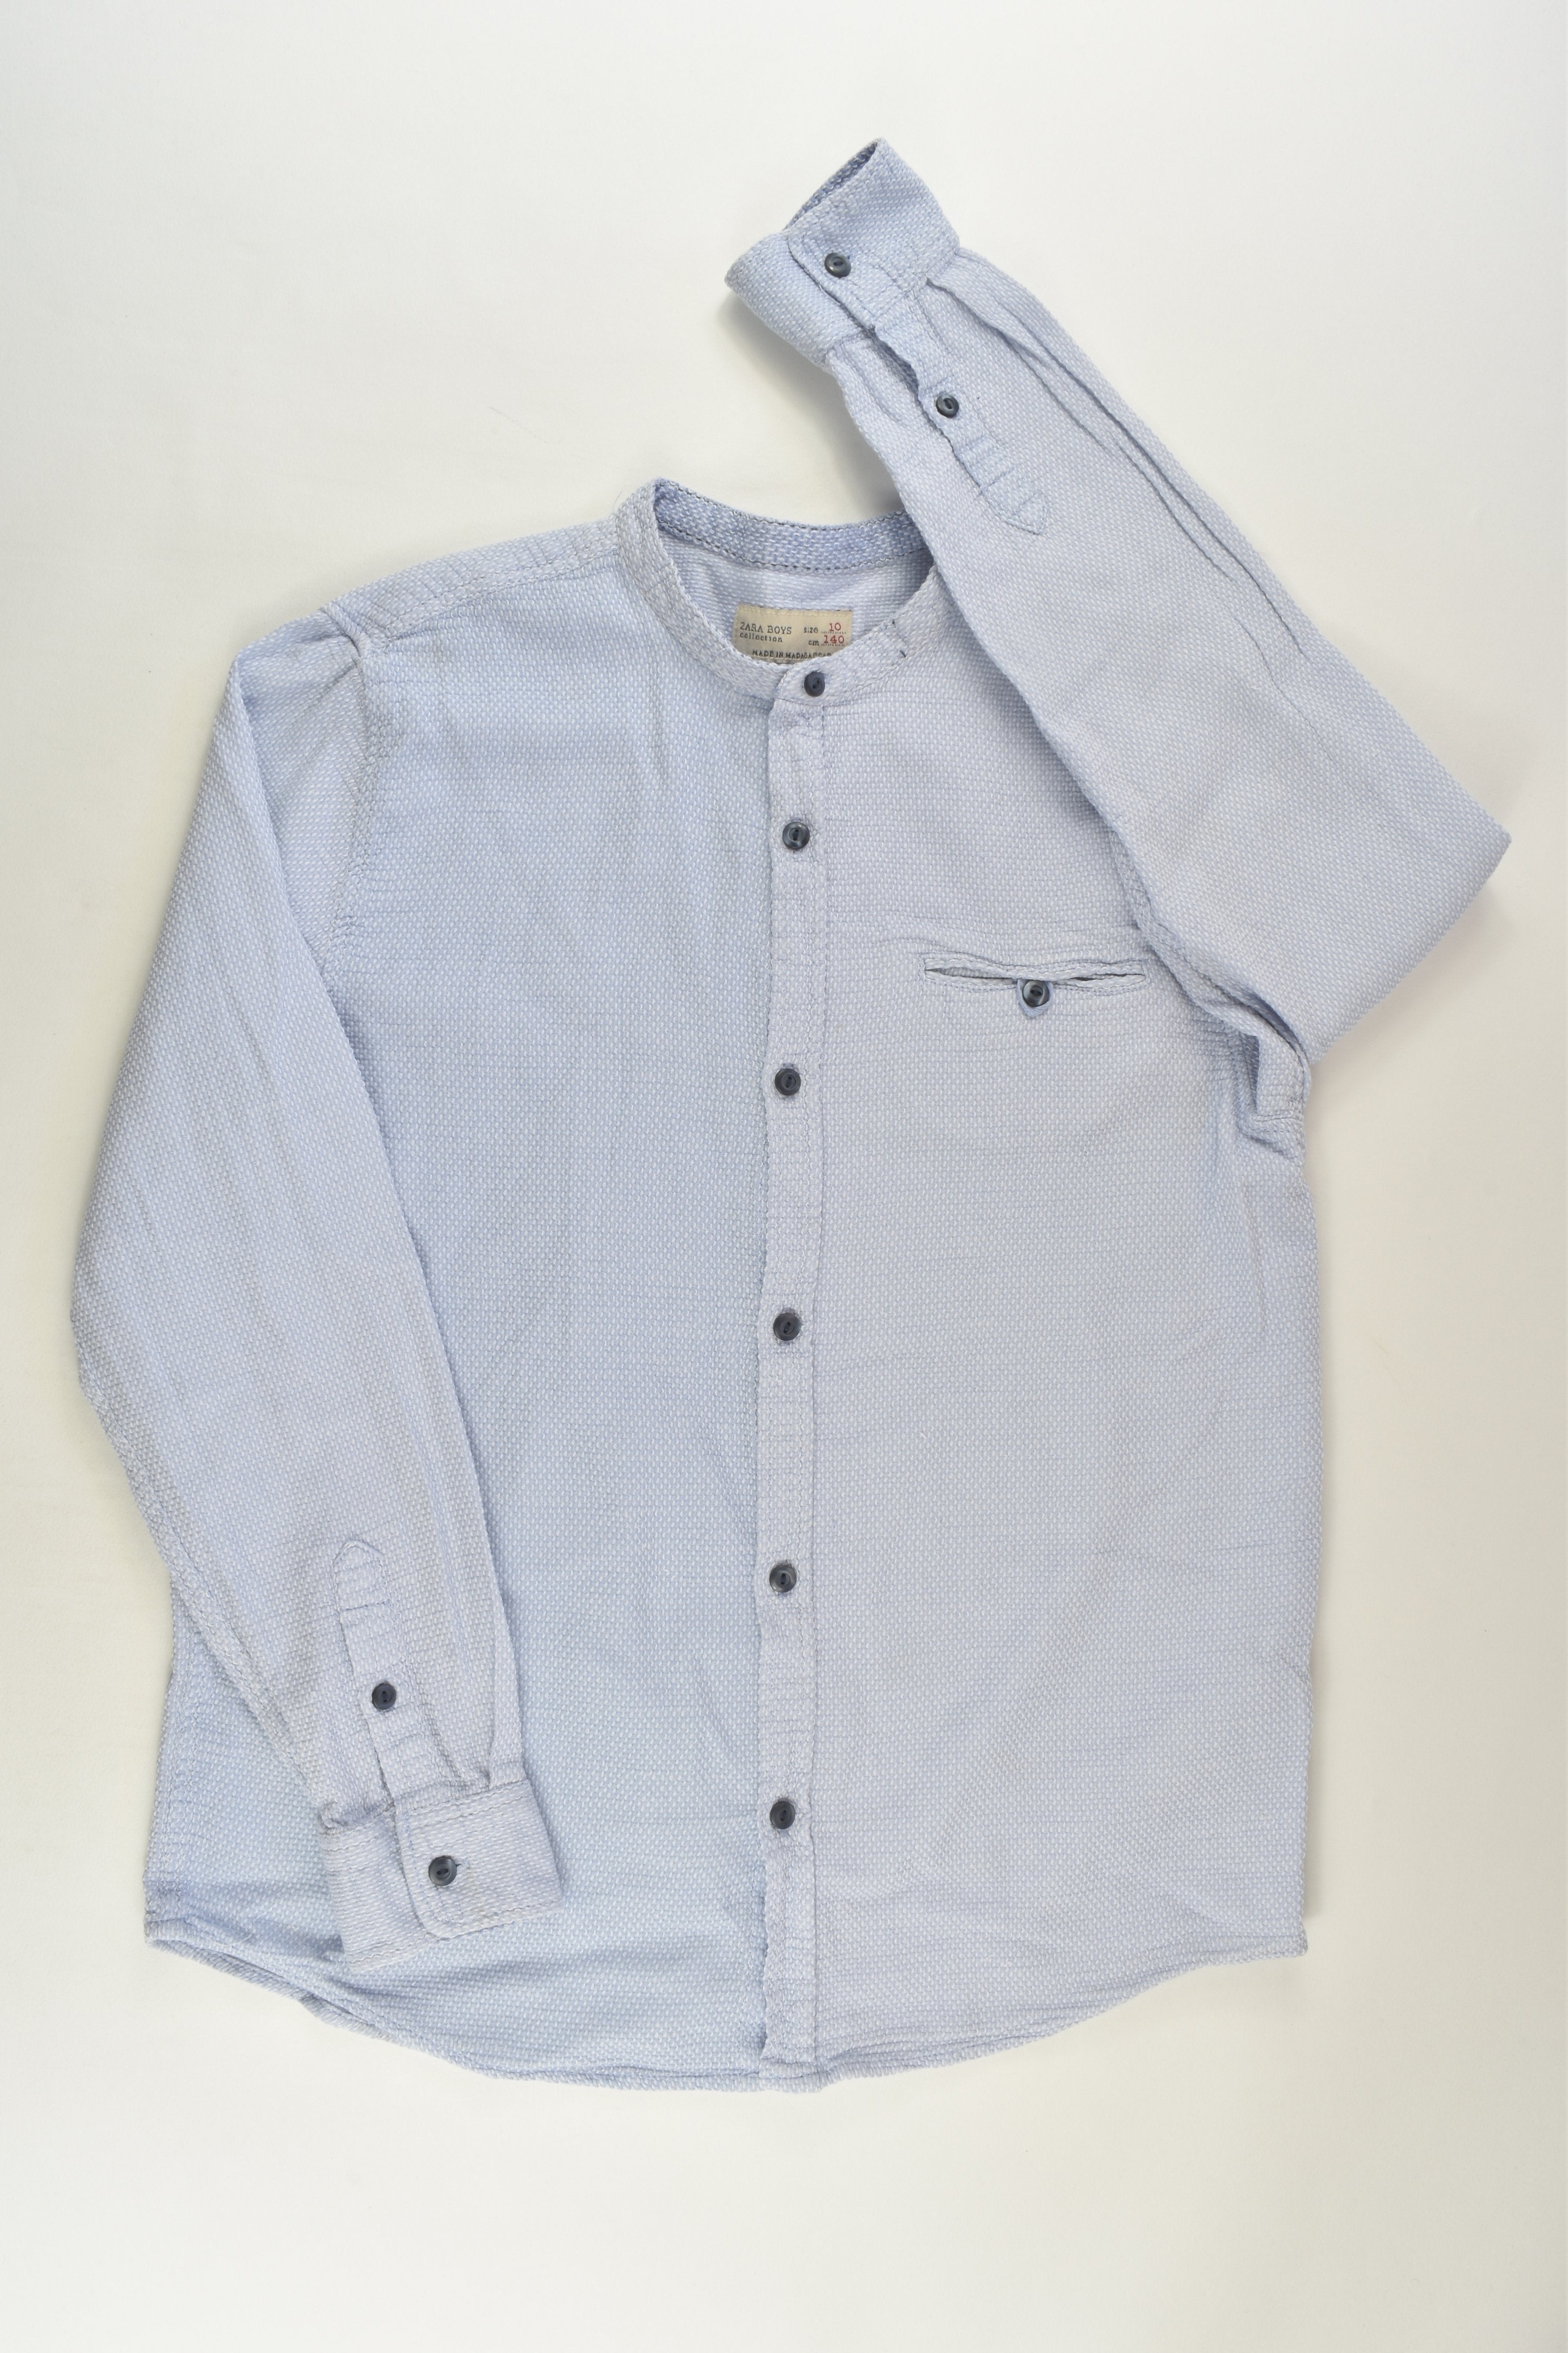 Zara Size 10 (140 cm) Shirt – MiniMe Preloved - Baby and Kids' Clothes